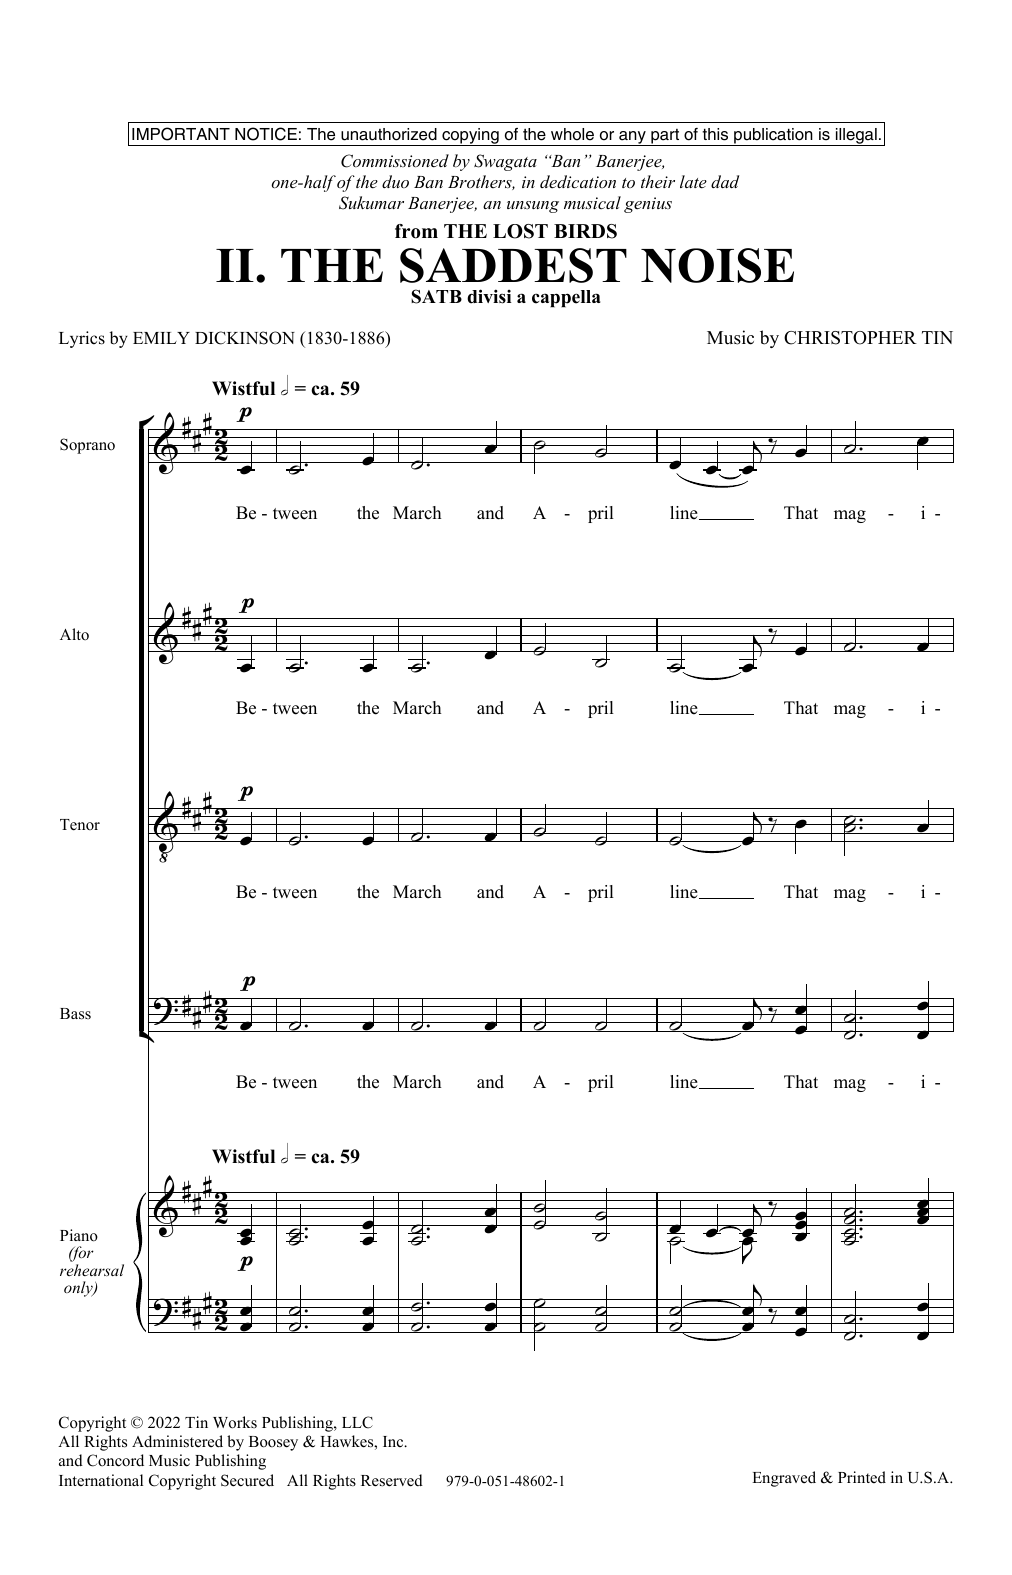 Download Christopher Tin The Saddest Noise (Movement II from The Sheet Music